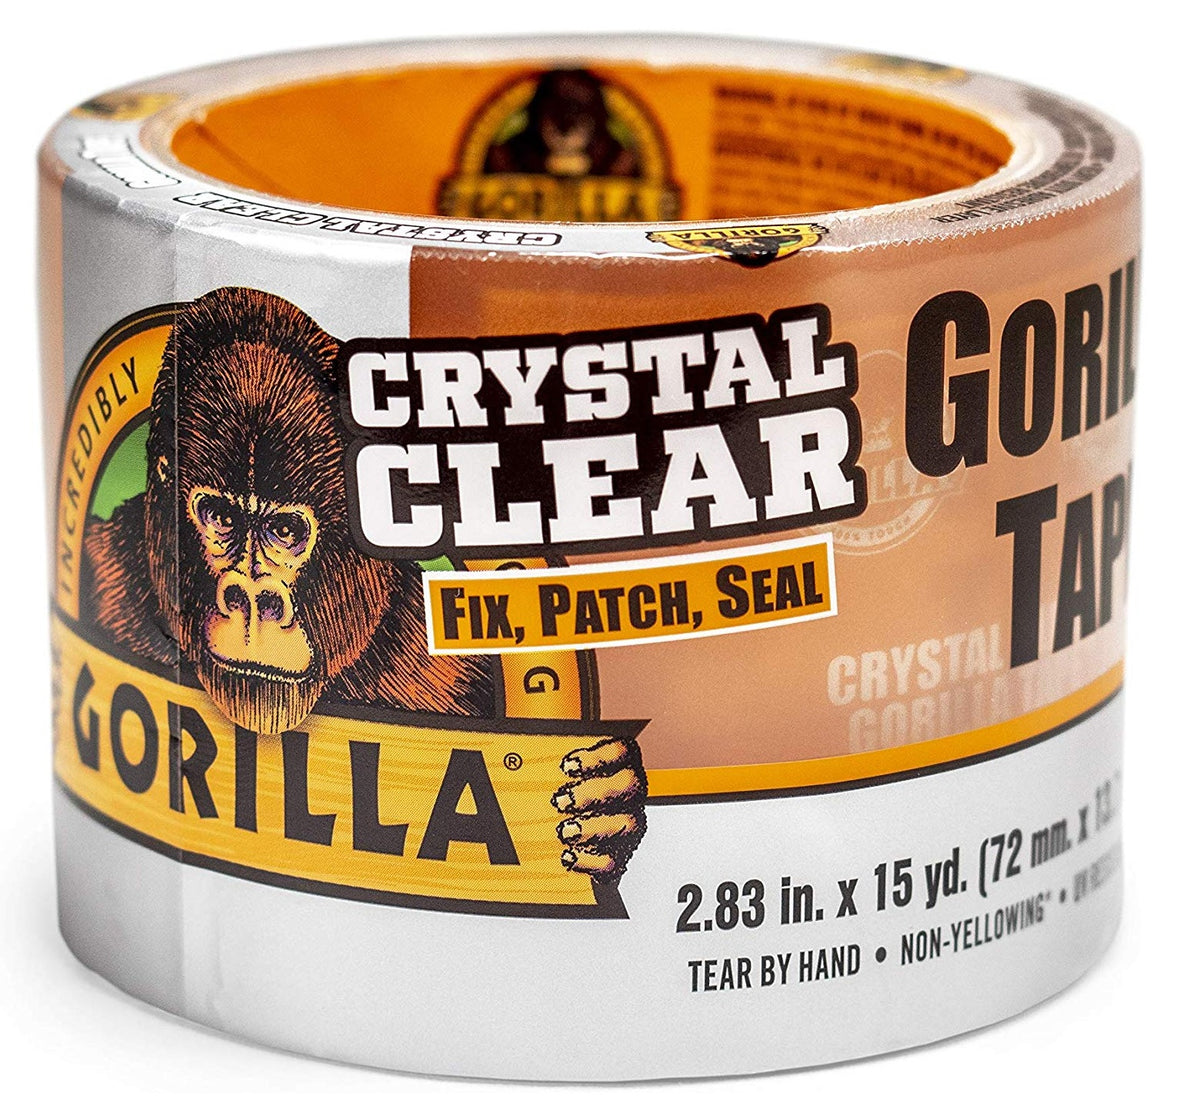 Gorilla 101277 Crystal Clear Duct Tape Tough & Wide, 15 Yard